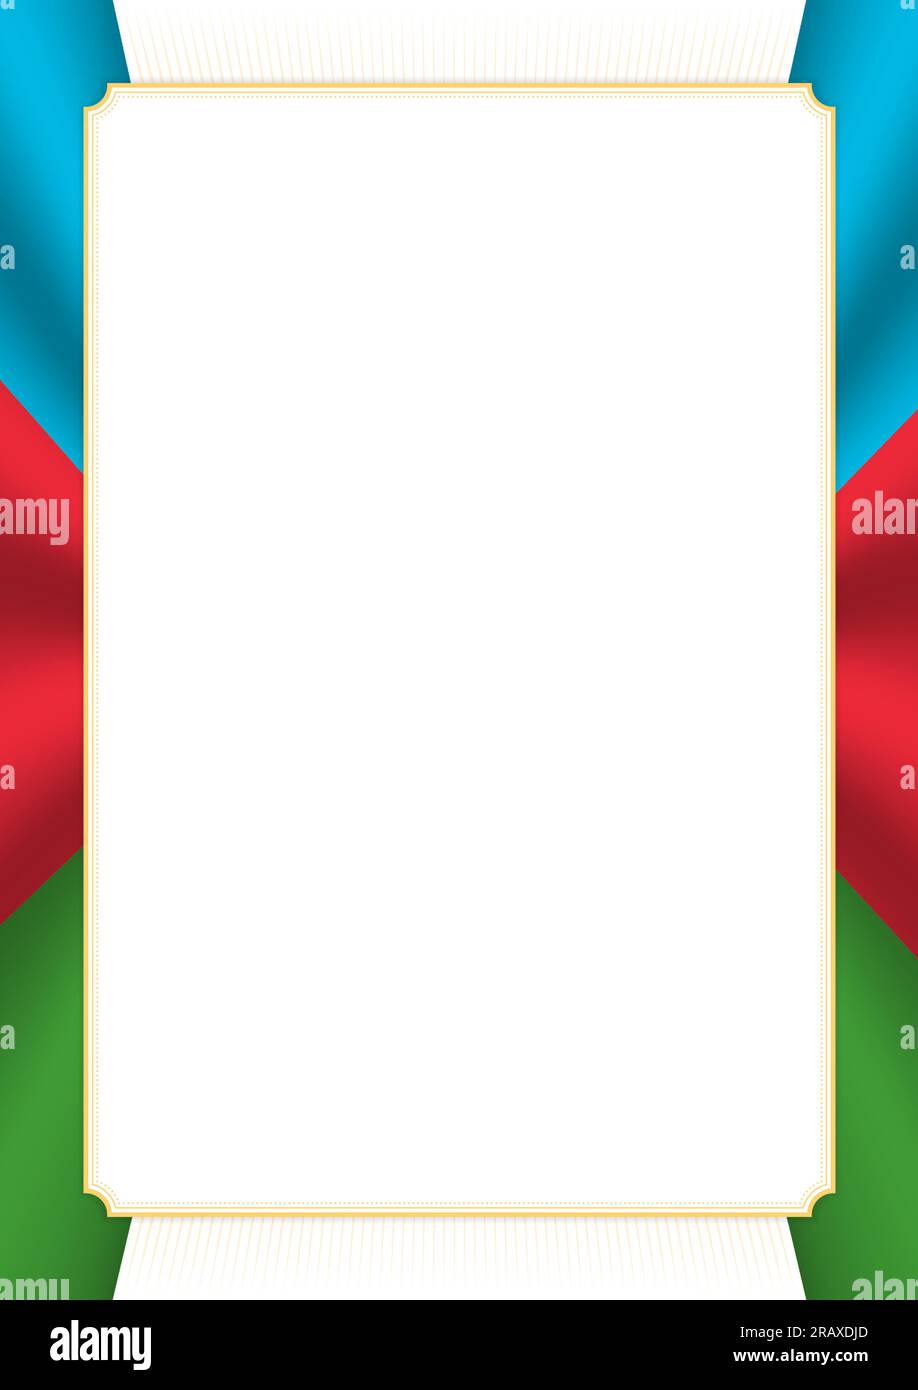 Vertical frame and border with colors of Azerbaijan flag, template ...